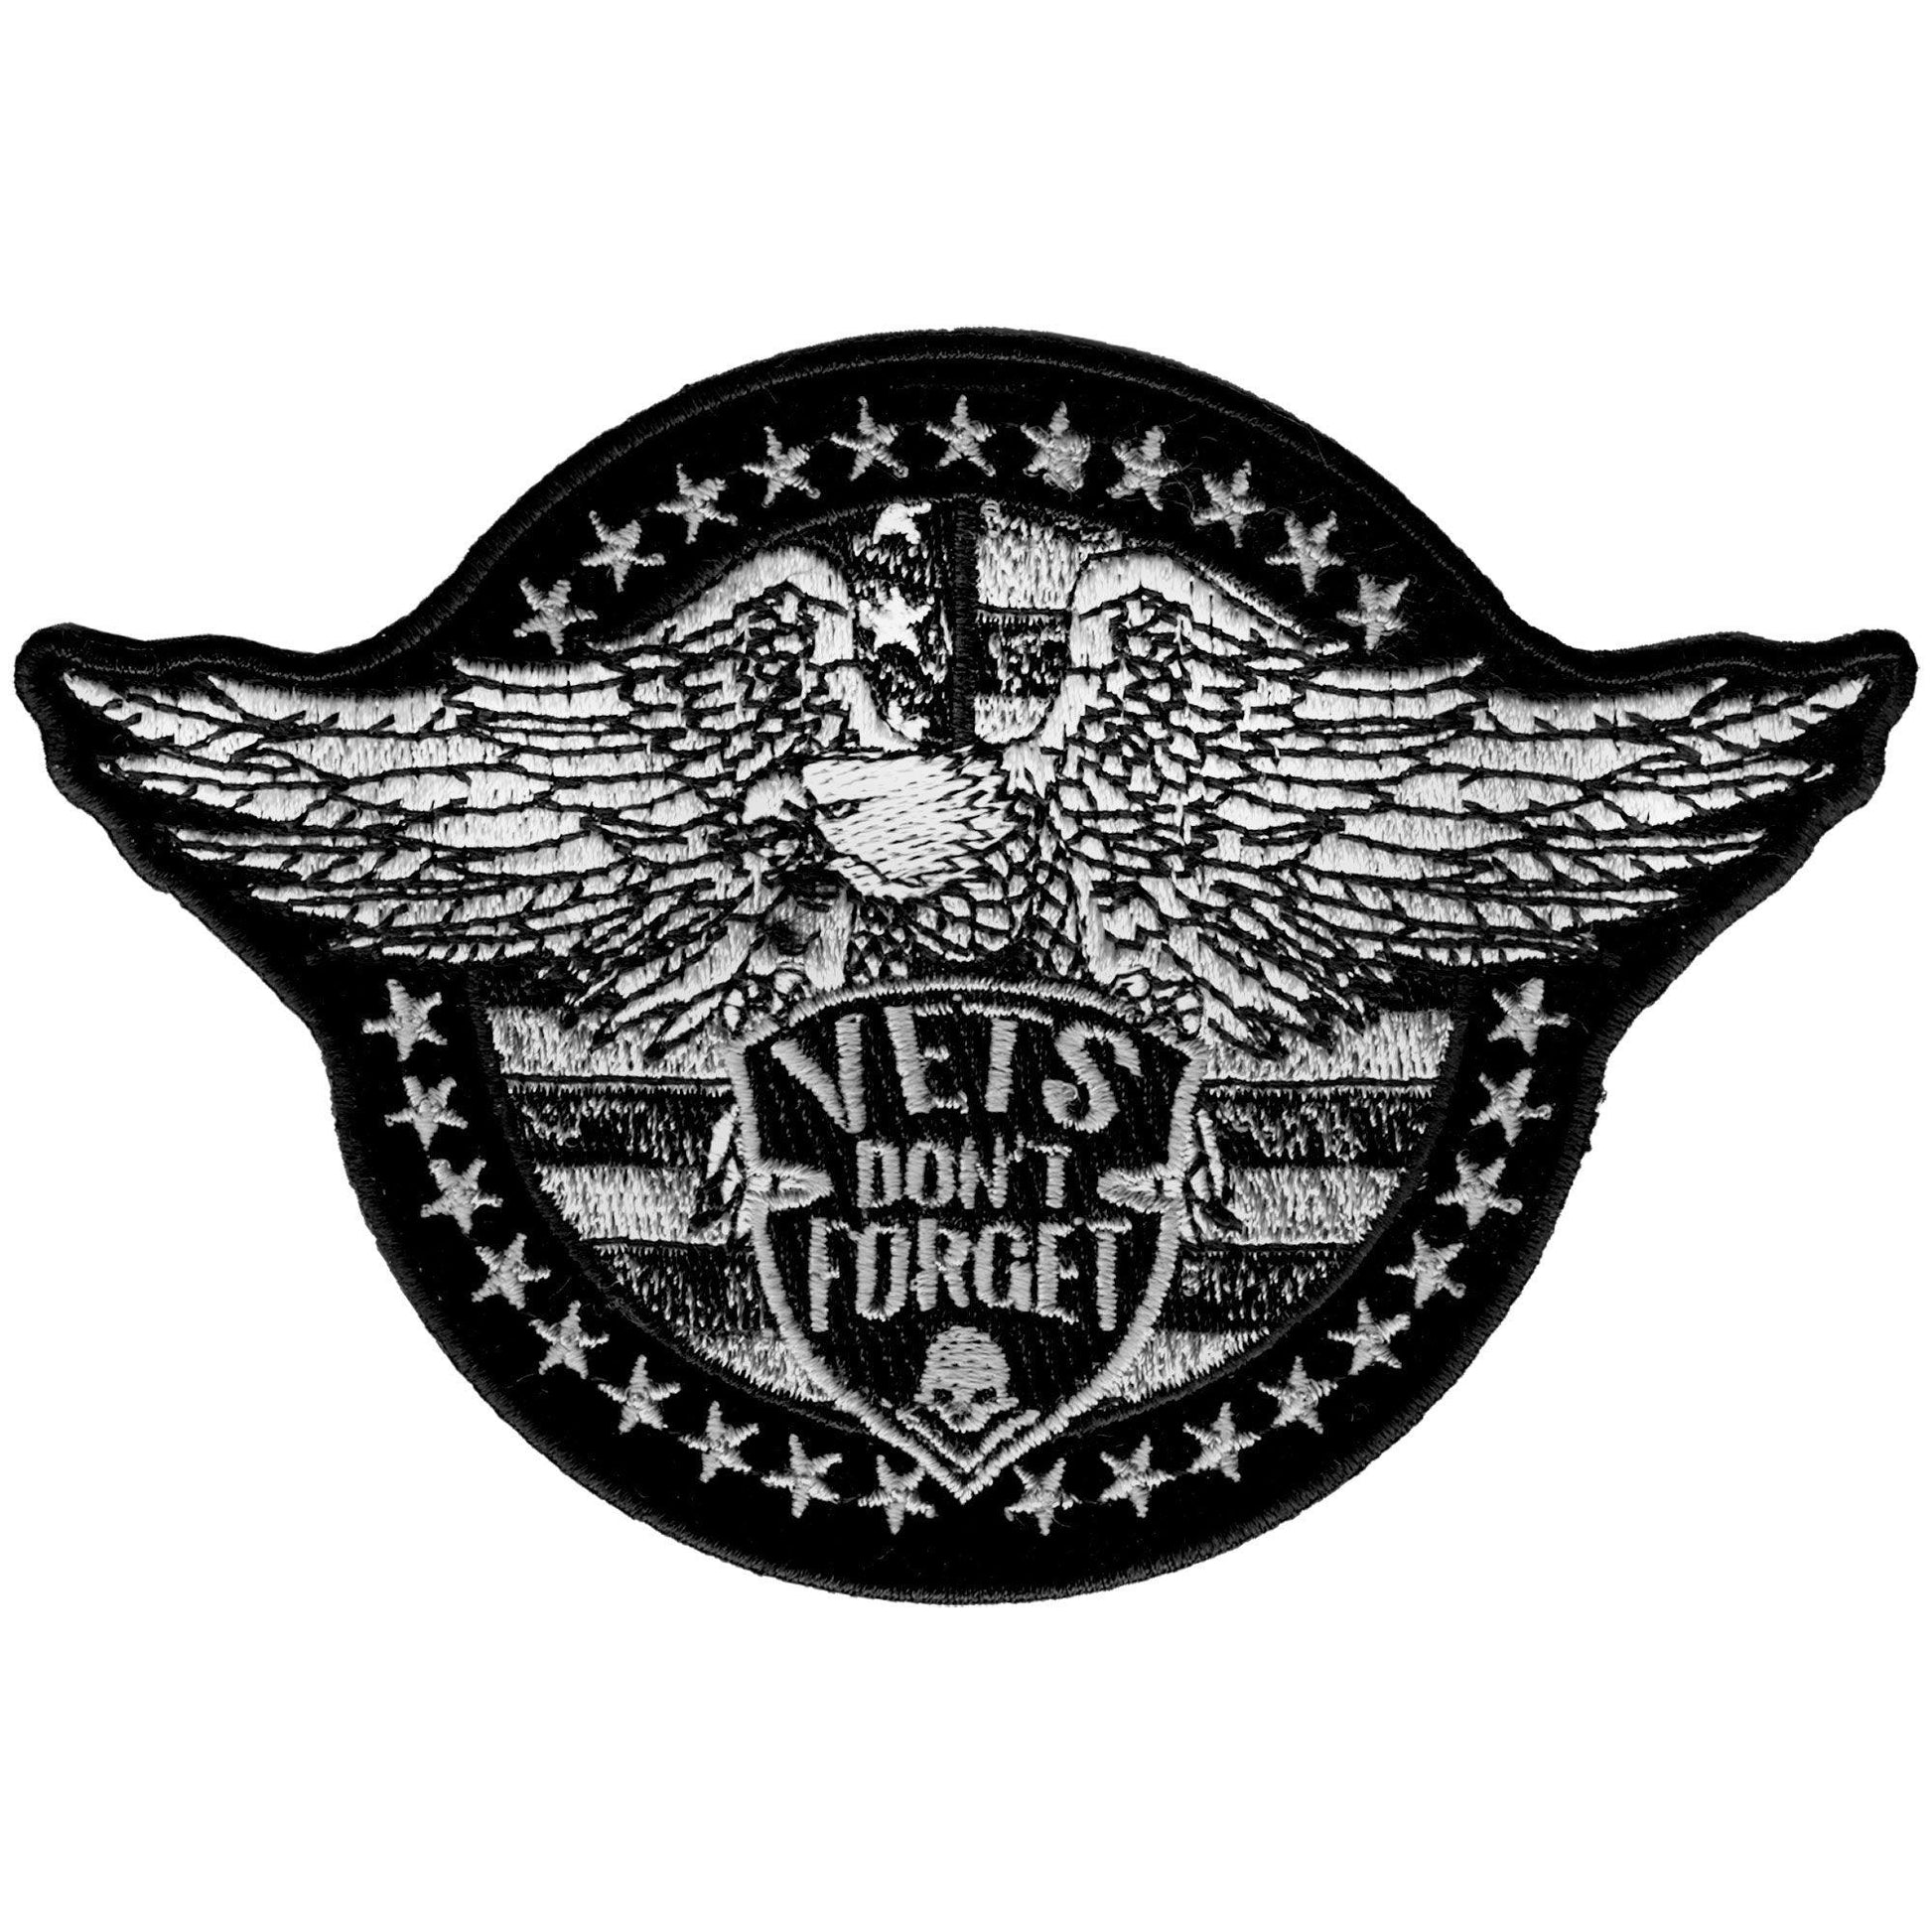 Vets Don't Forget Eagle 5" x 3" Patch - Military Republic